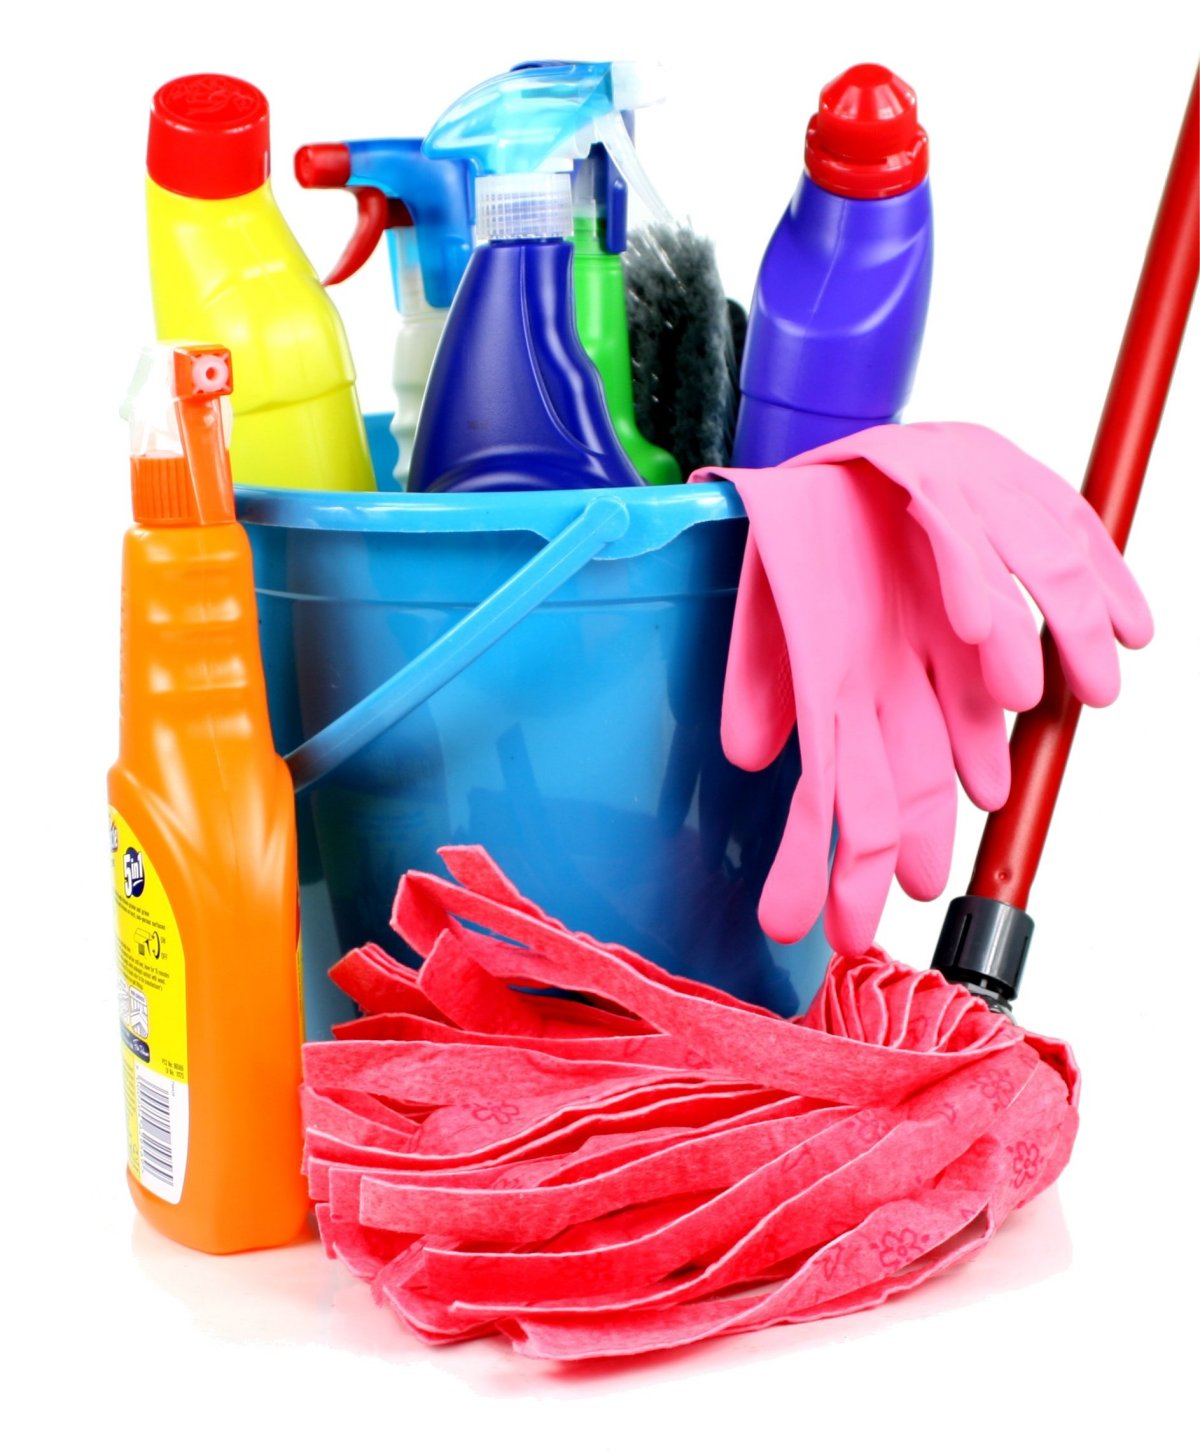 Cleaning – Free Creative Commons Images from Picserver